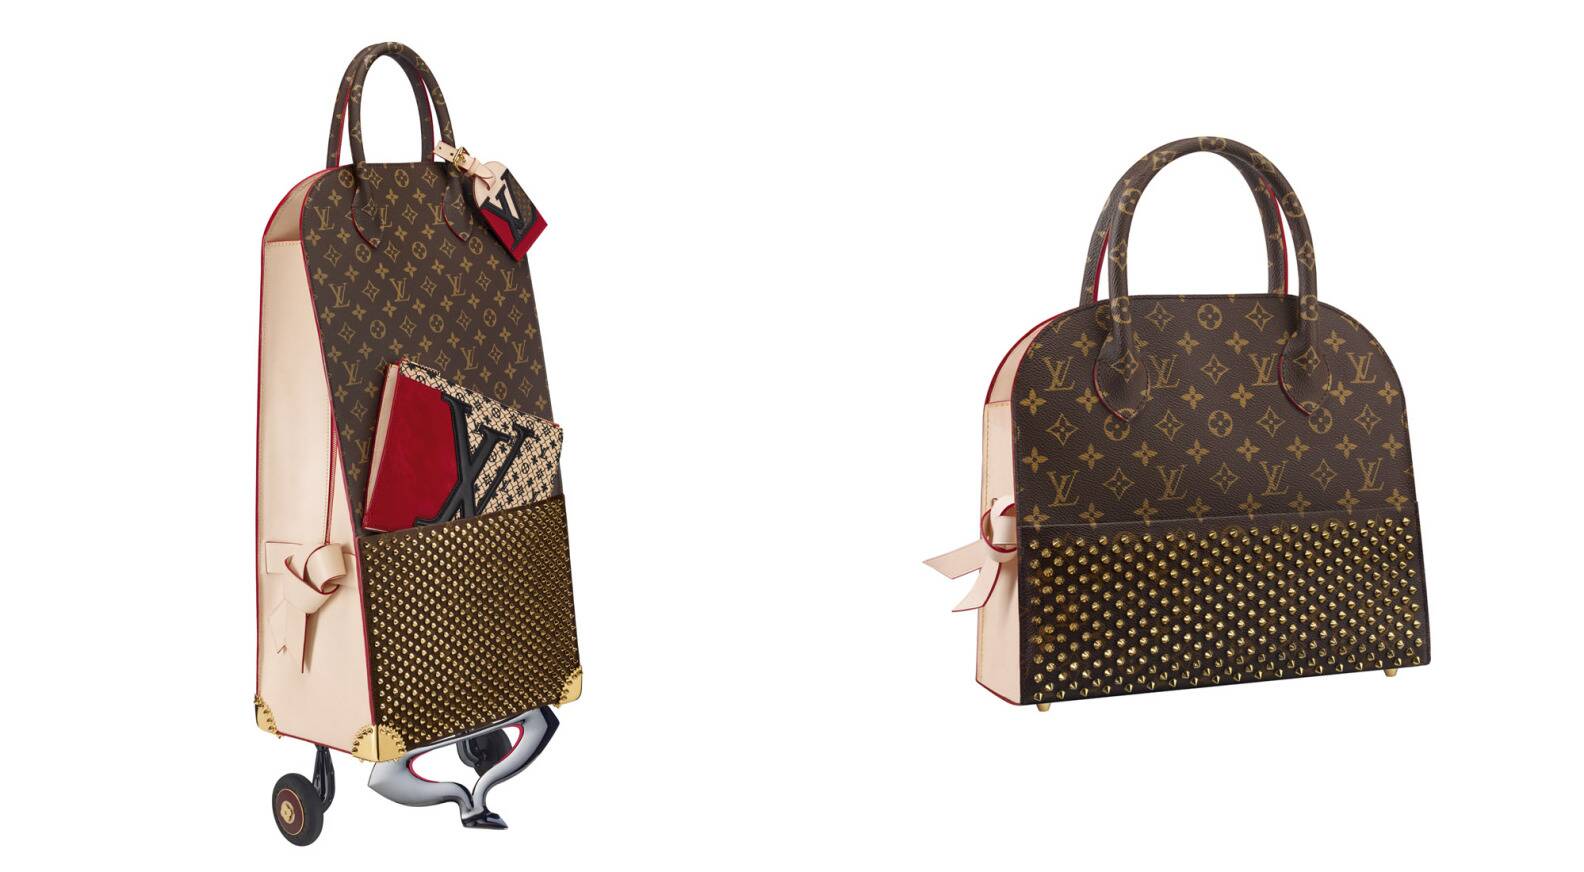 Louis Vuitton, exceptional ready-to-wear - Fashion & Leather Goods - LVMH